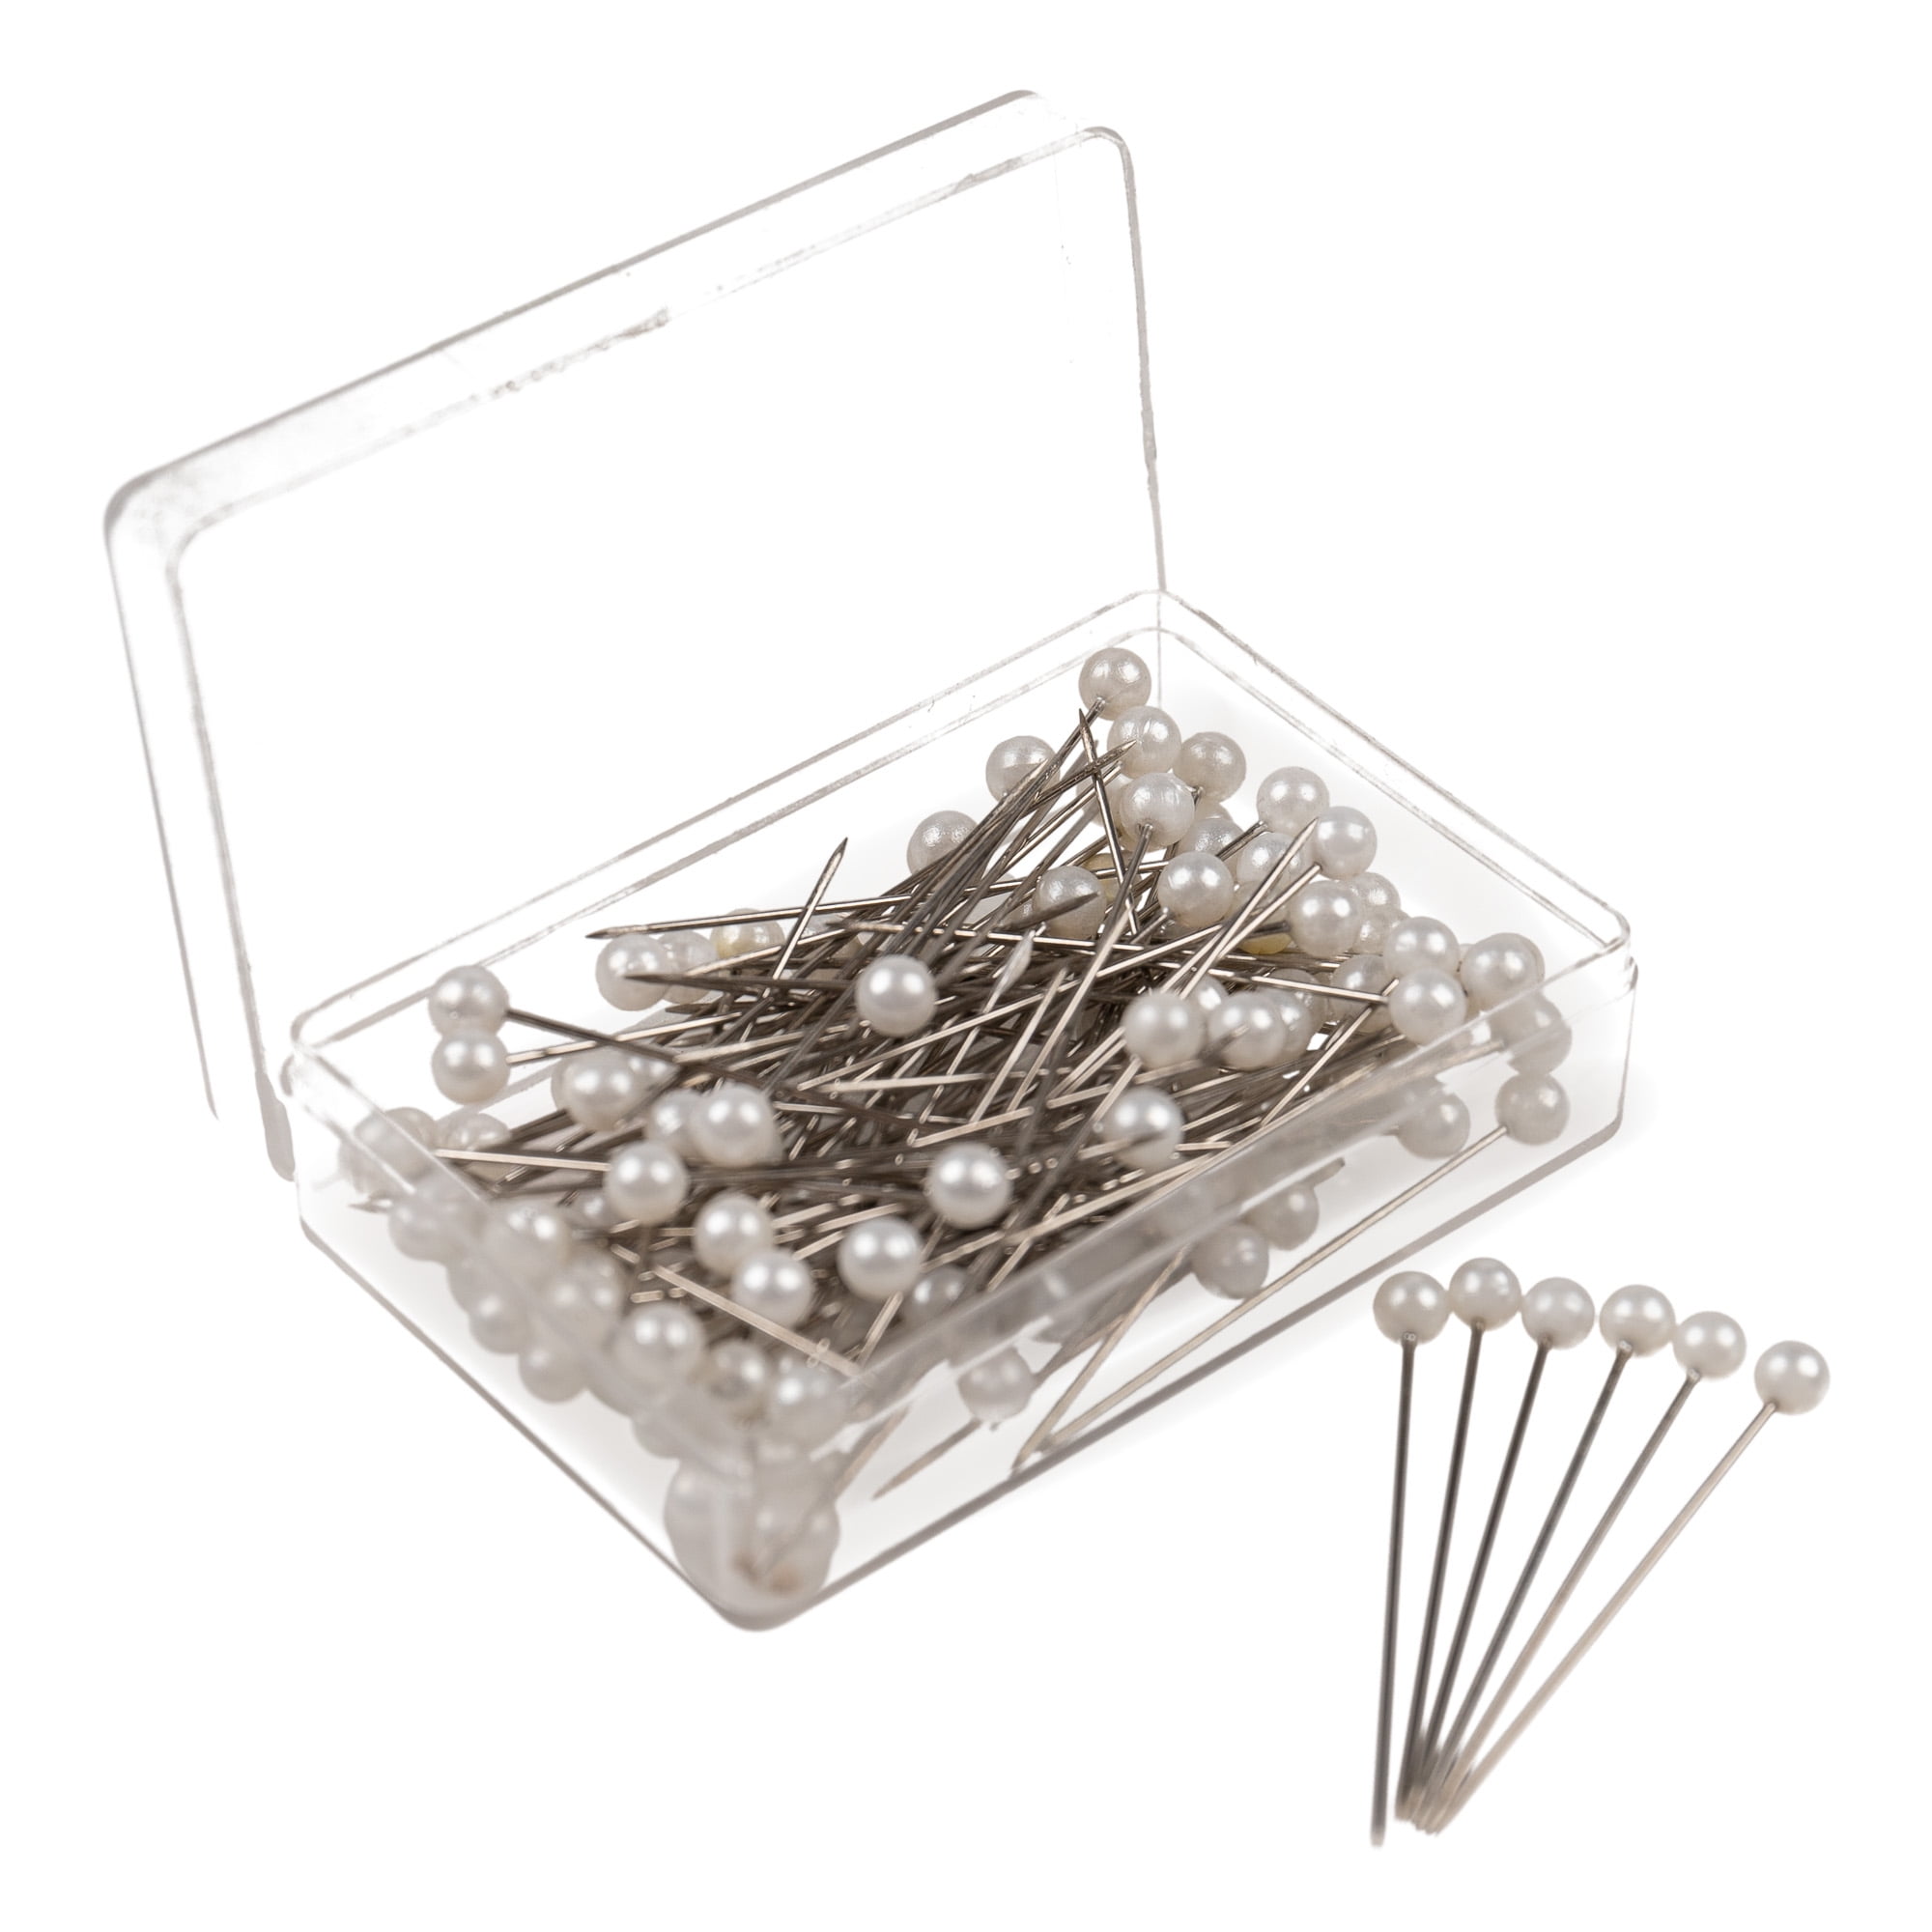 Sewing Pins Sewing Pins With Plastic Head Round Head Sewing Pins